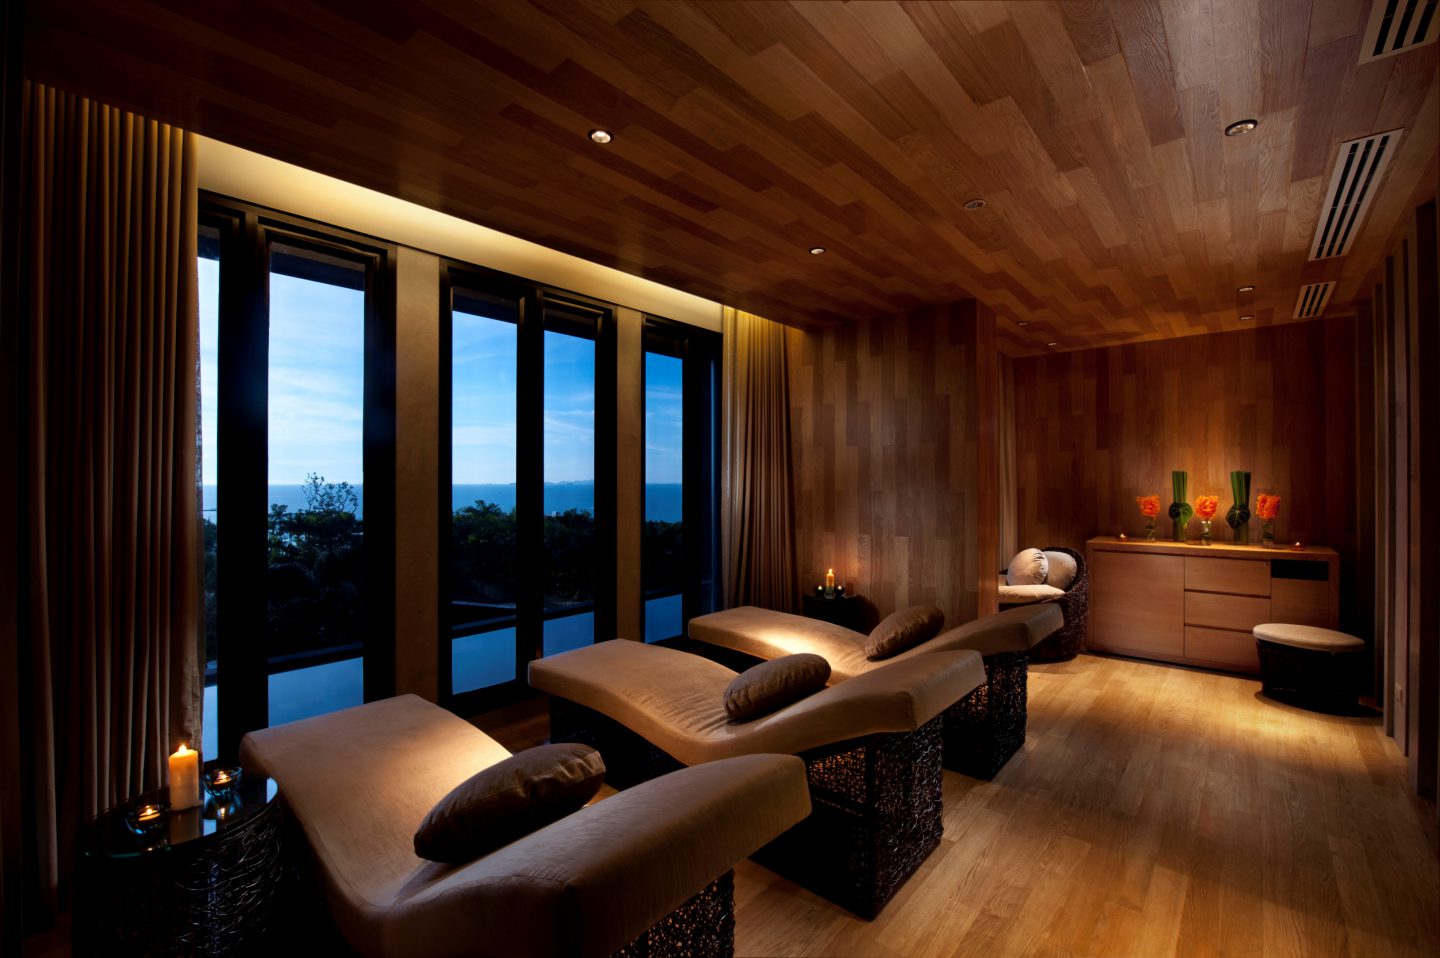 Relaxation room in a spa.